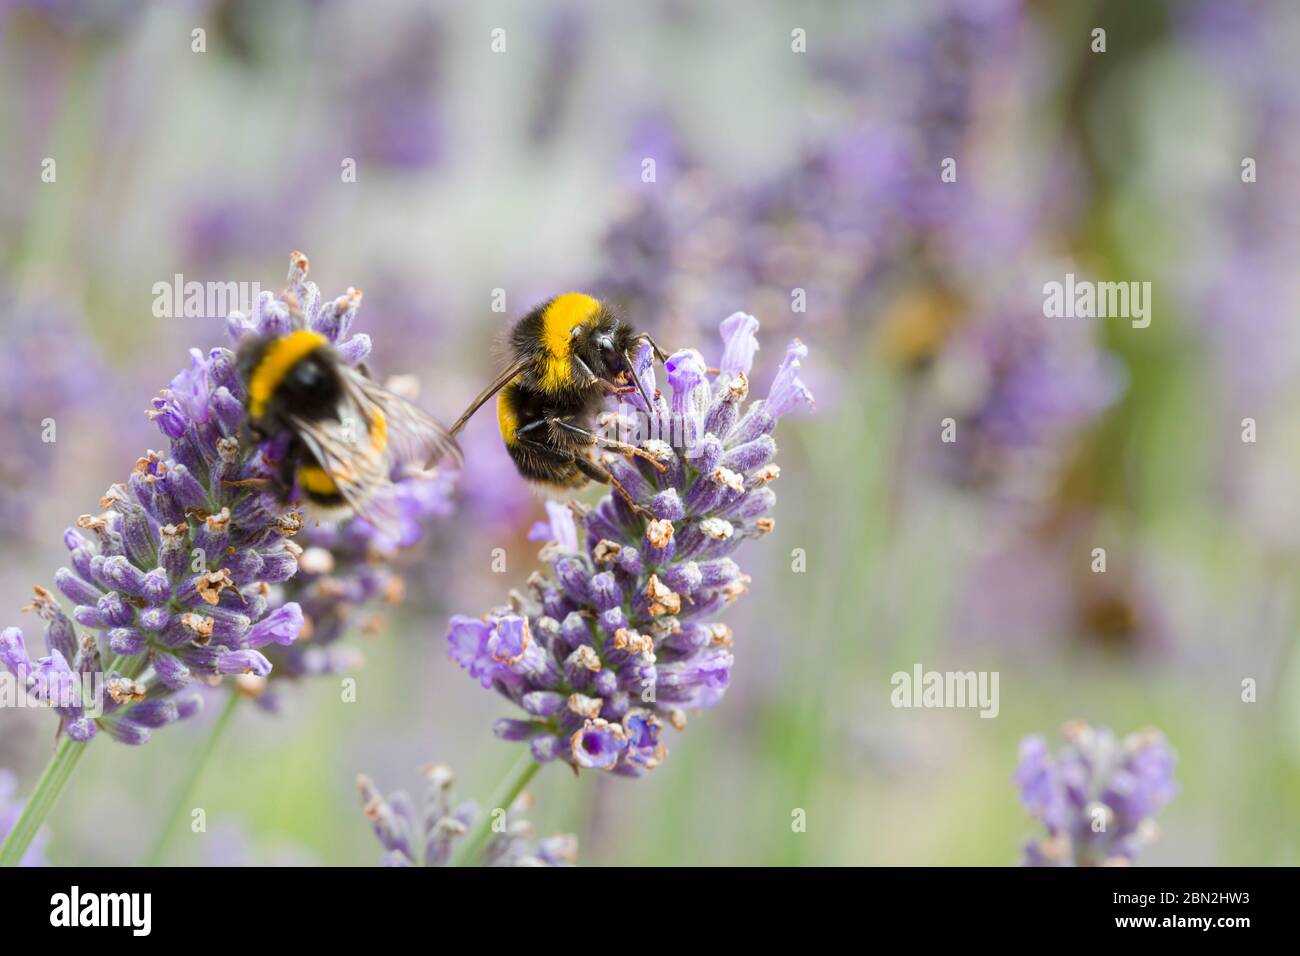 Bumble bees pollinating lavender (lavandula angustifolia) flowers. Insect pollination in summer, UK Stock Photo